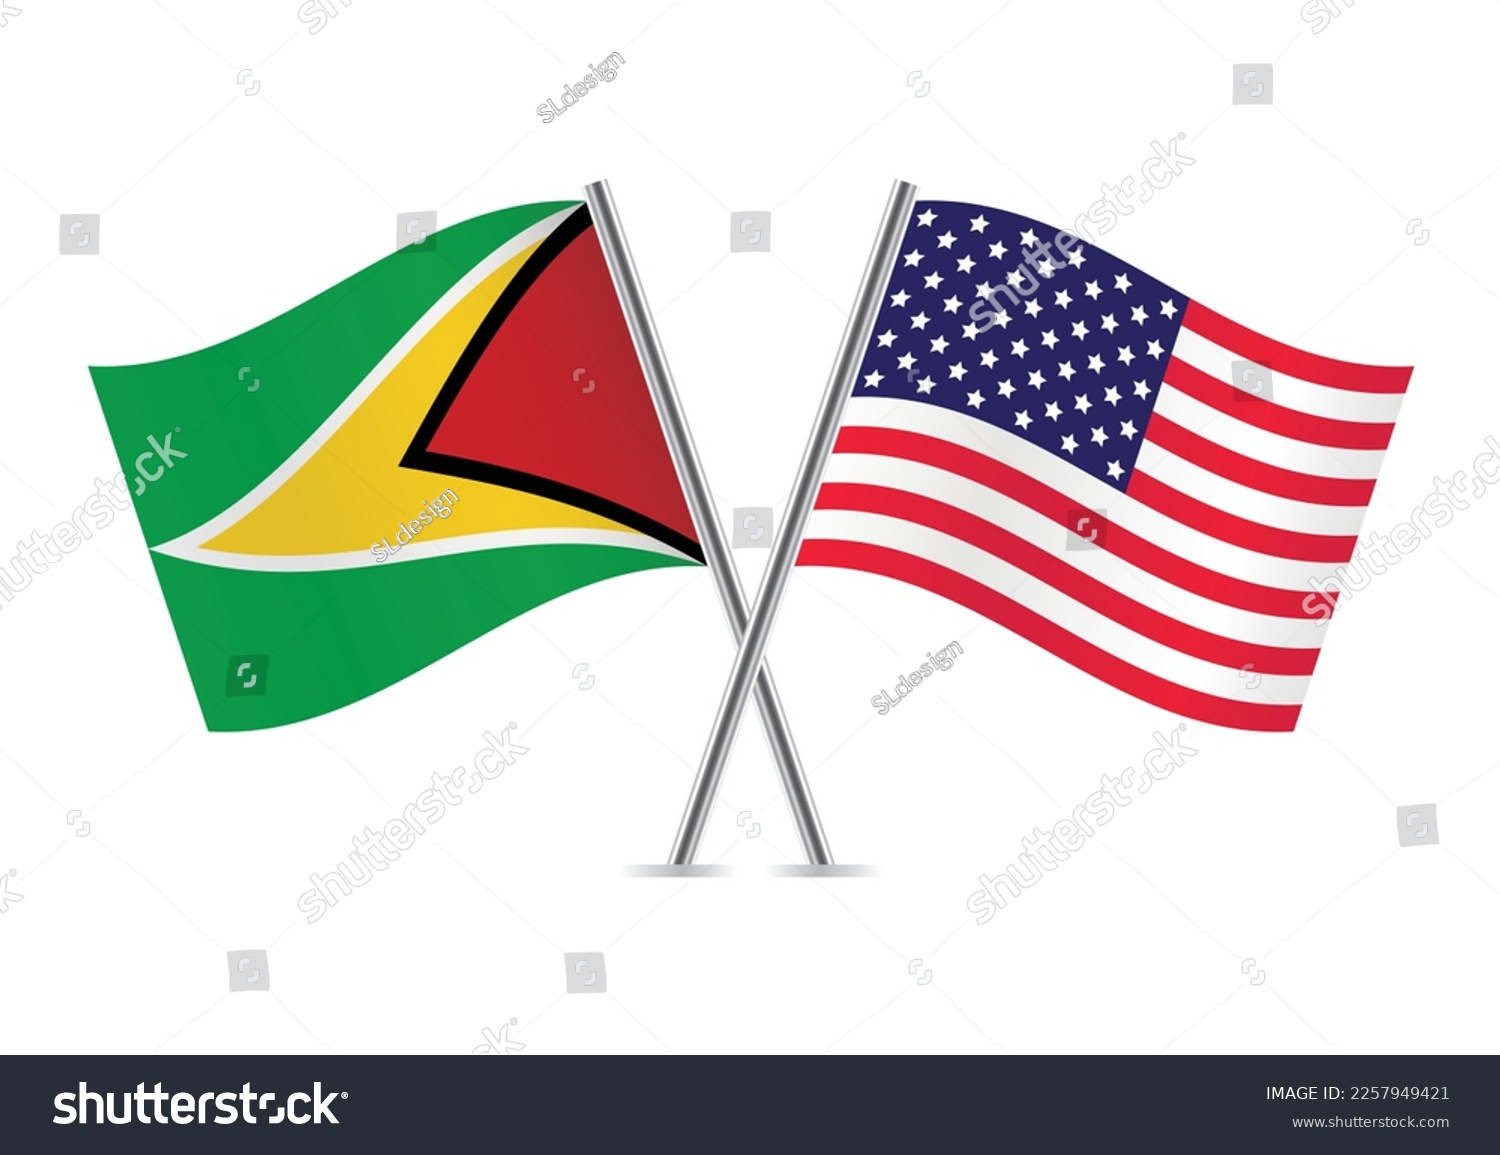 SVG of Guyana and America crossed flags. Guyanese and American flags on white background. Vector icon set. Vector illustration. svg